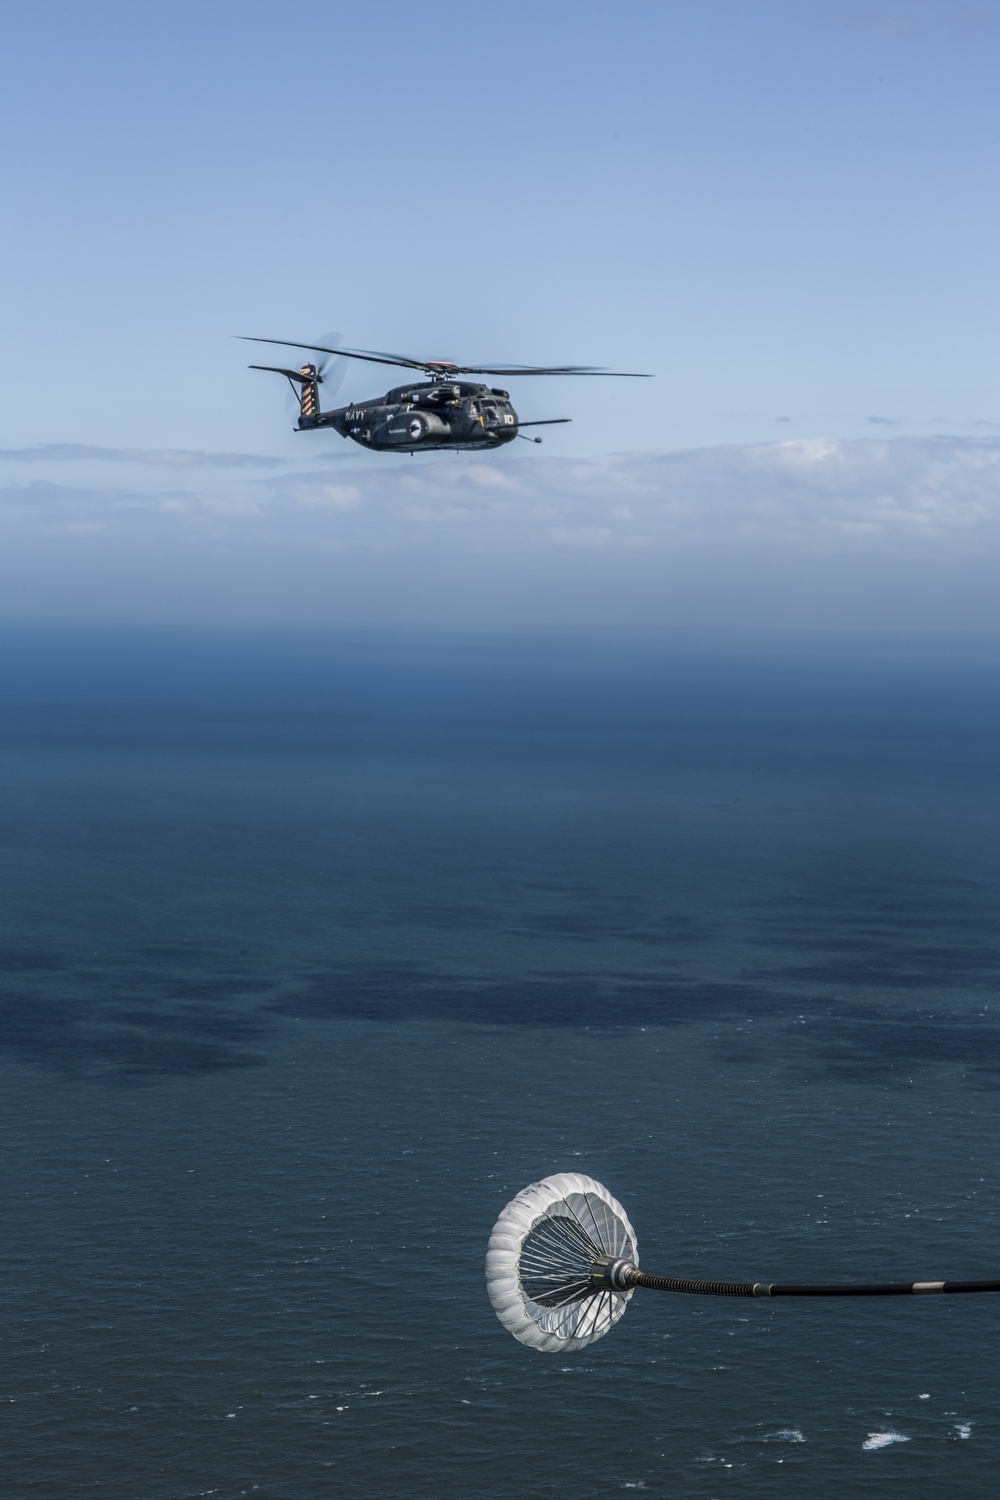 VMGR-252 Conducts Aerial Refuel for HM-15